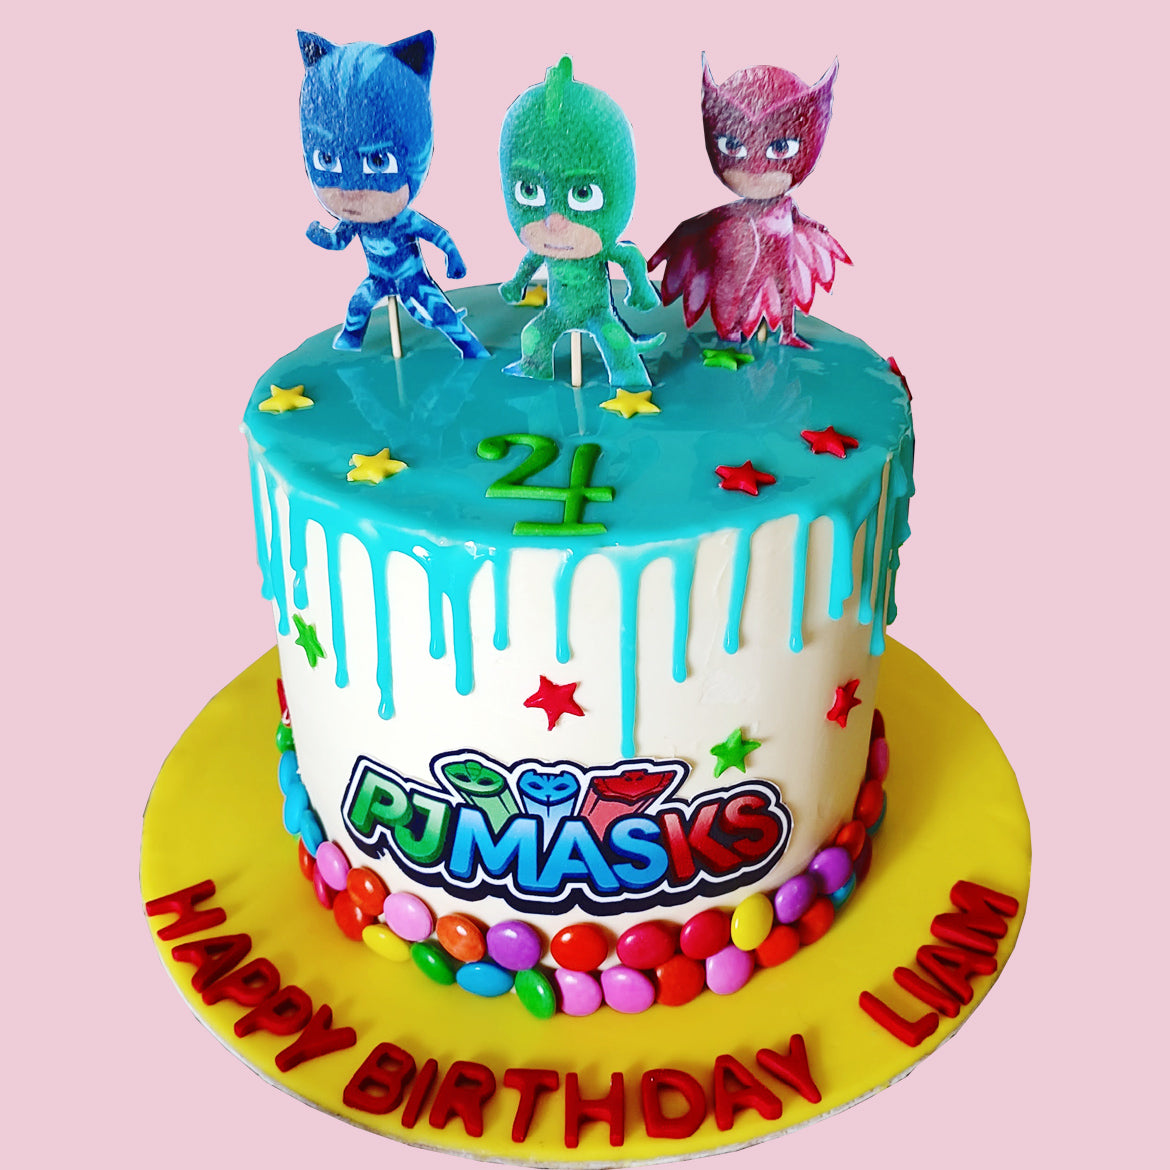 PJ Mask Cake 1114 – Cakes And Memories Bakeshop, 42% OFF